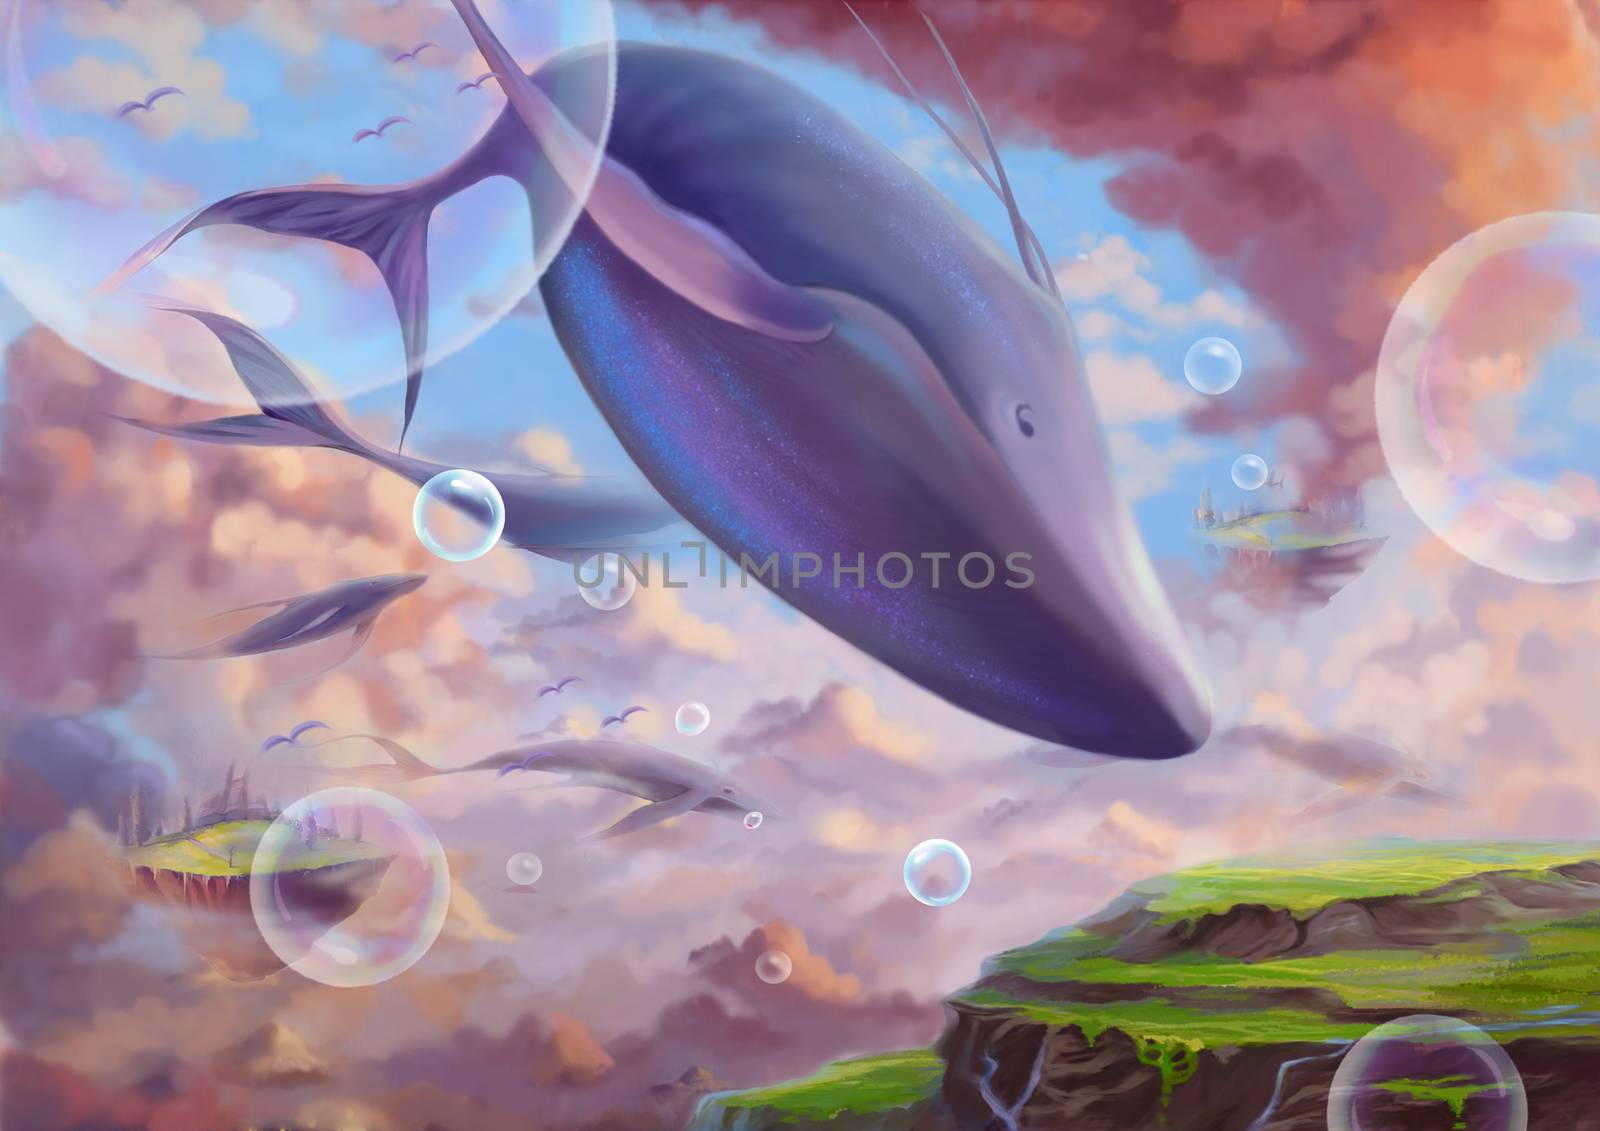 Illustration: A Fantastic Wonderland with flying Lands and Whales. Fantastic Cartoon Style Wallpaper Background Scene Design with Story.